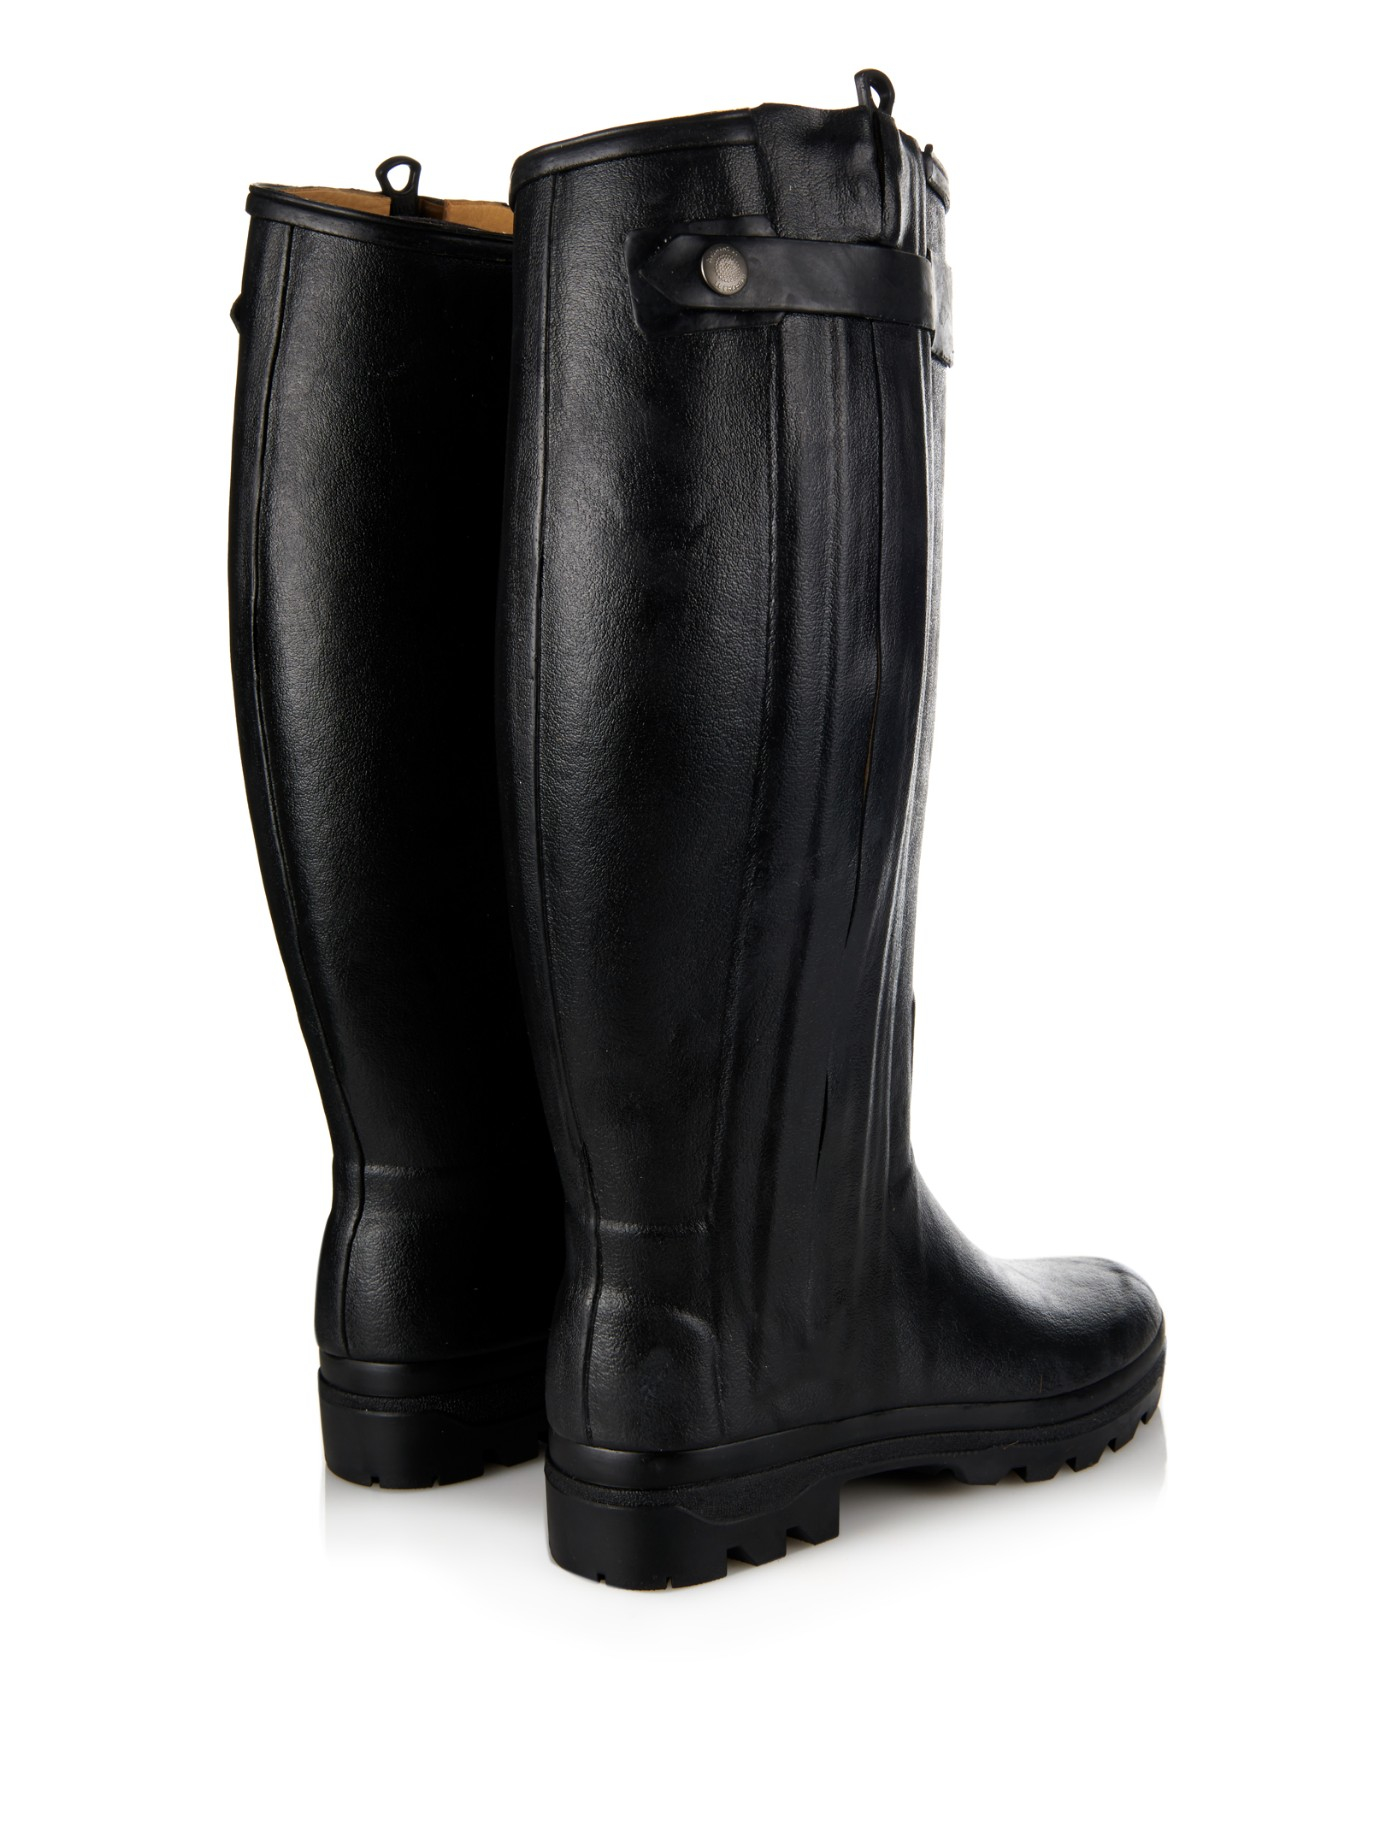 Le Chameau Chasseur Rubber And Leather Boots in Black | Lyst